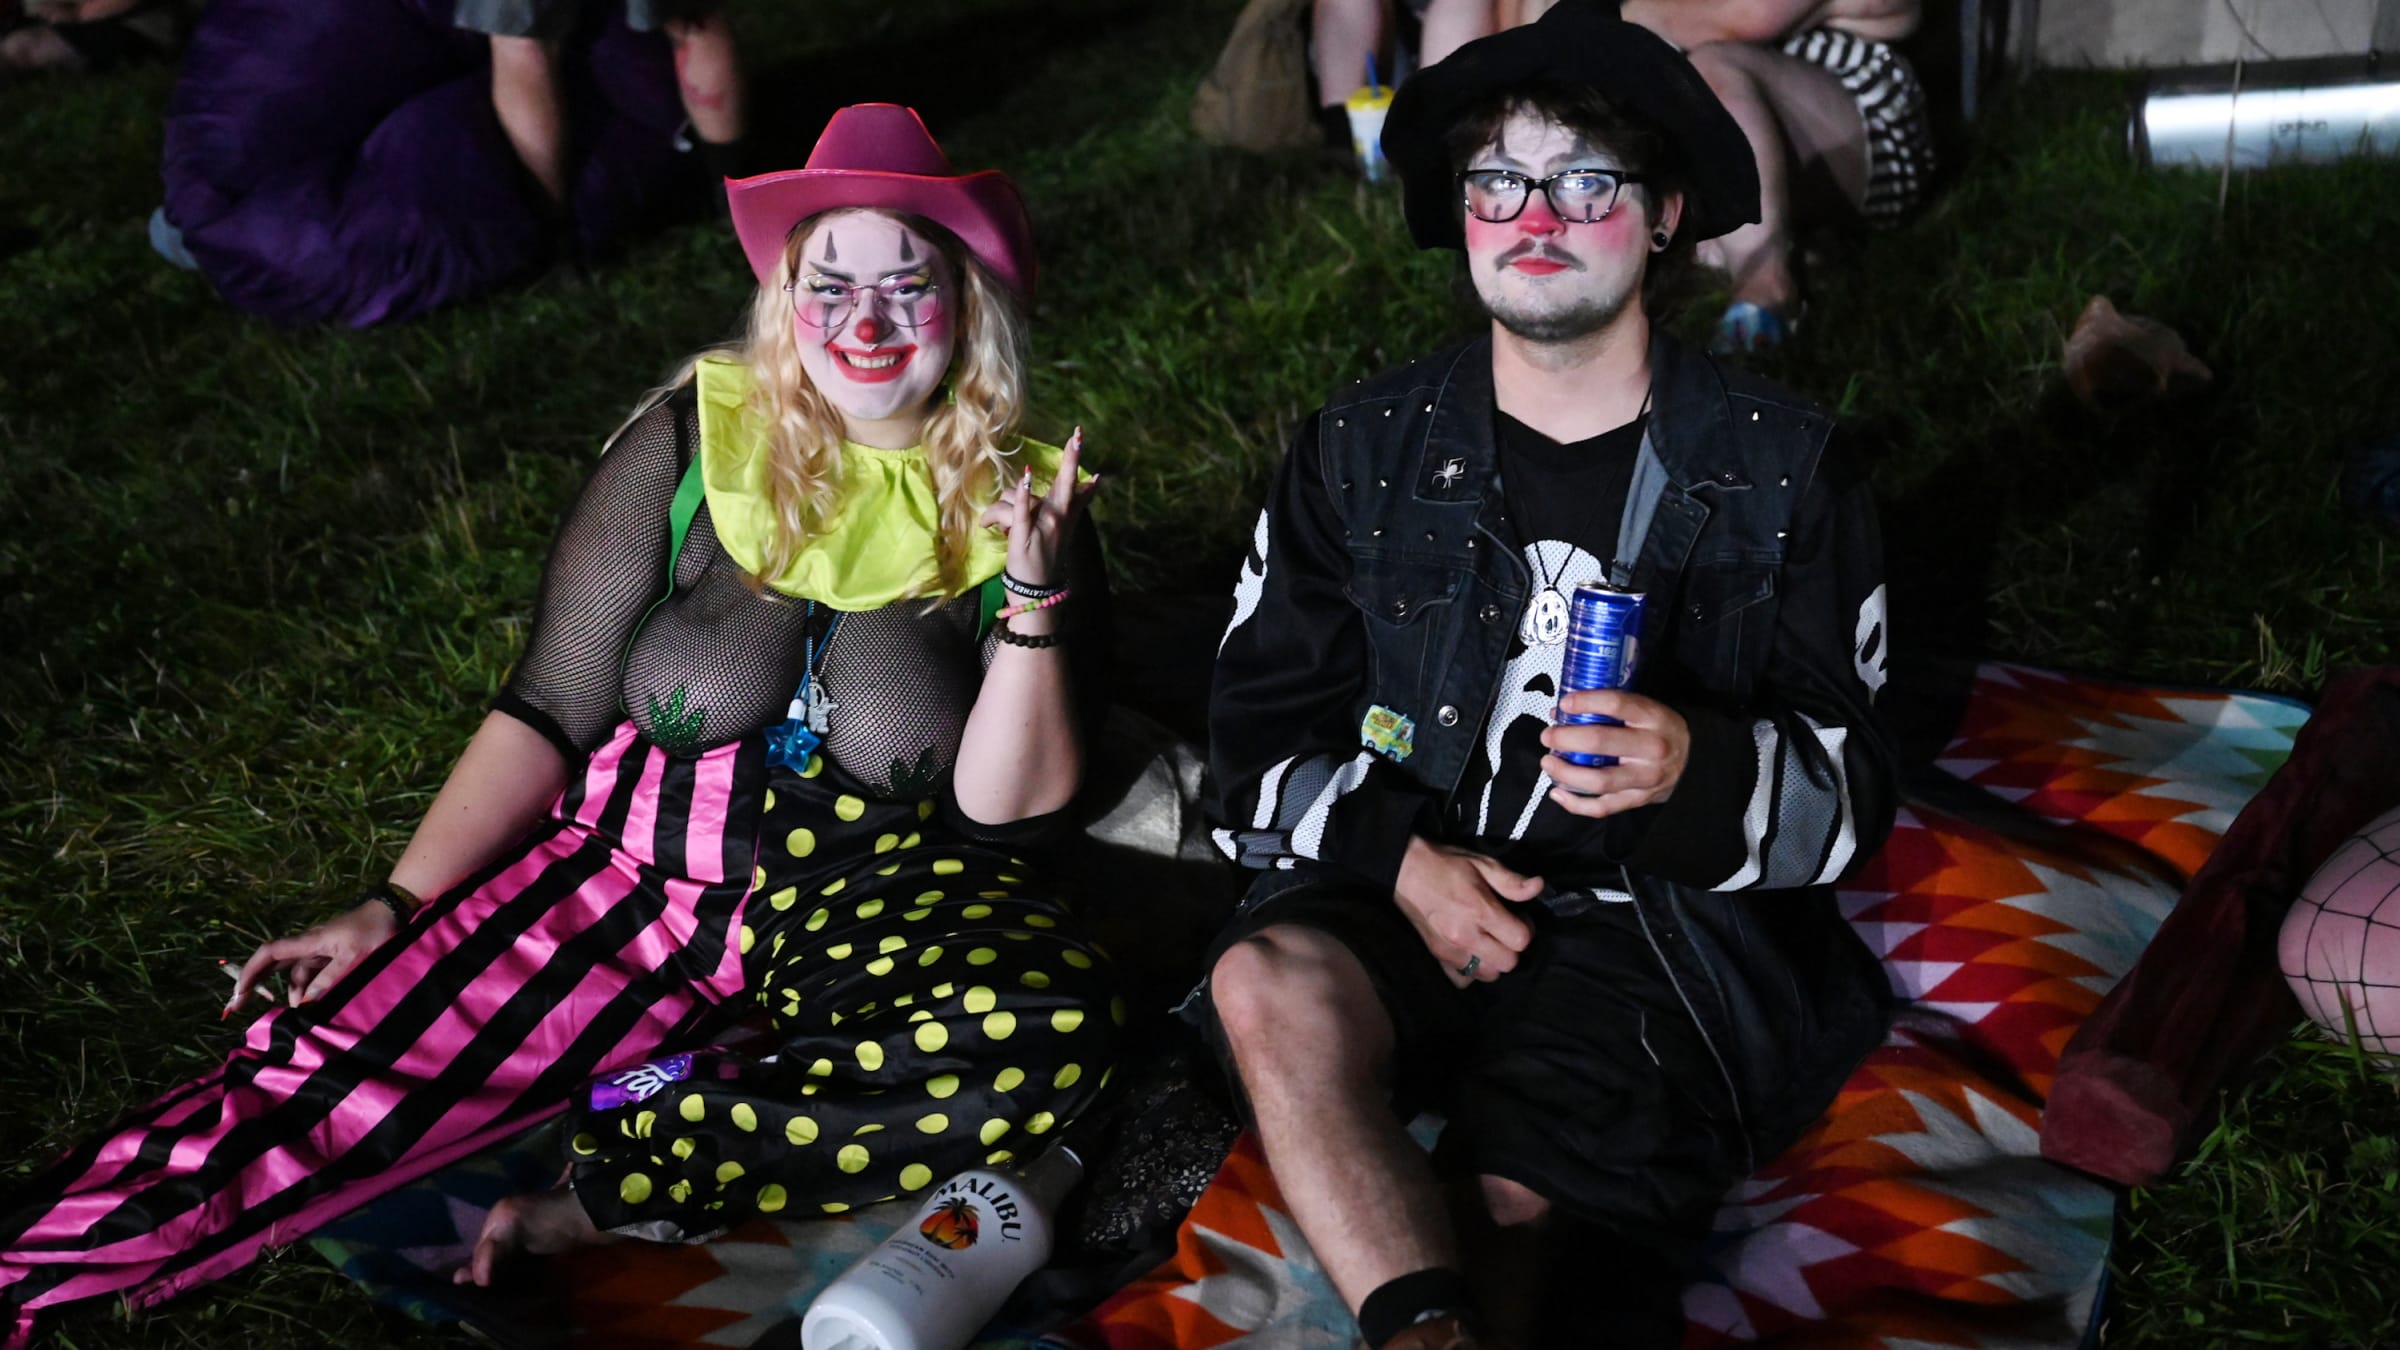 Two fans pose together at the 2023 Gathering of the Juggalos